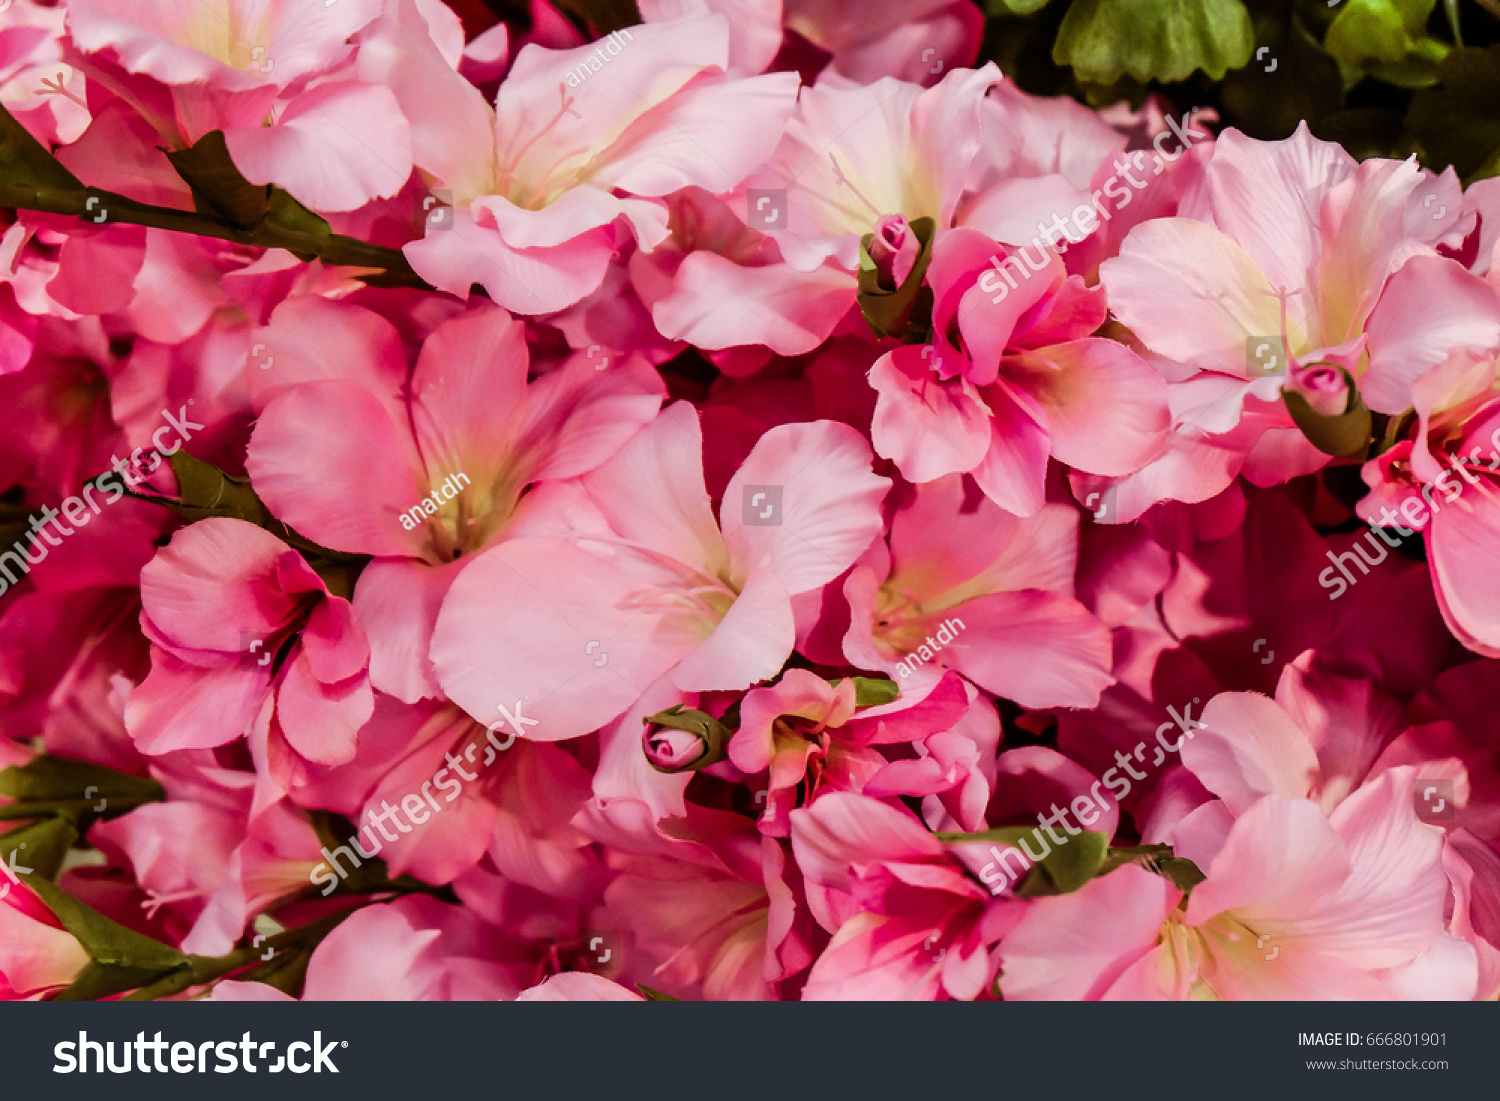 pink flowers close up #666801901